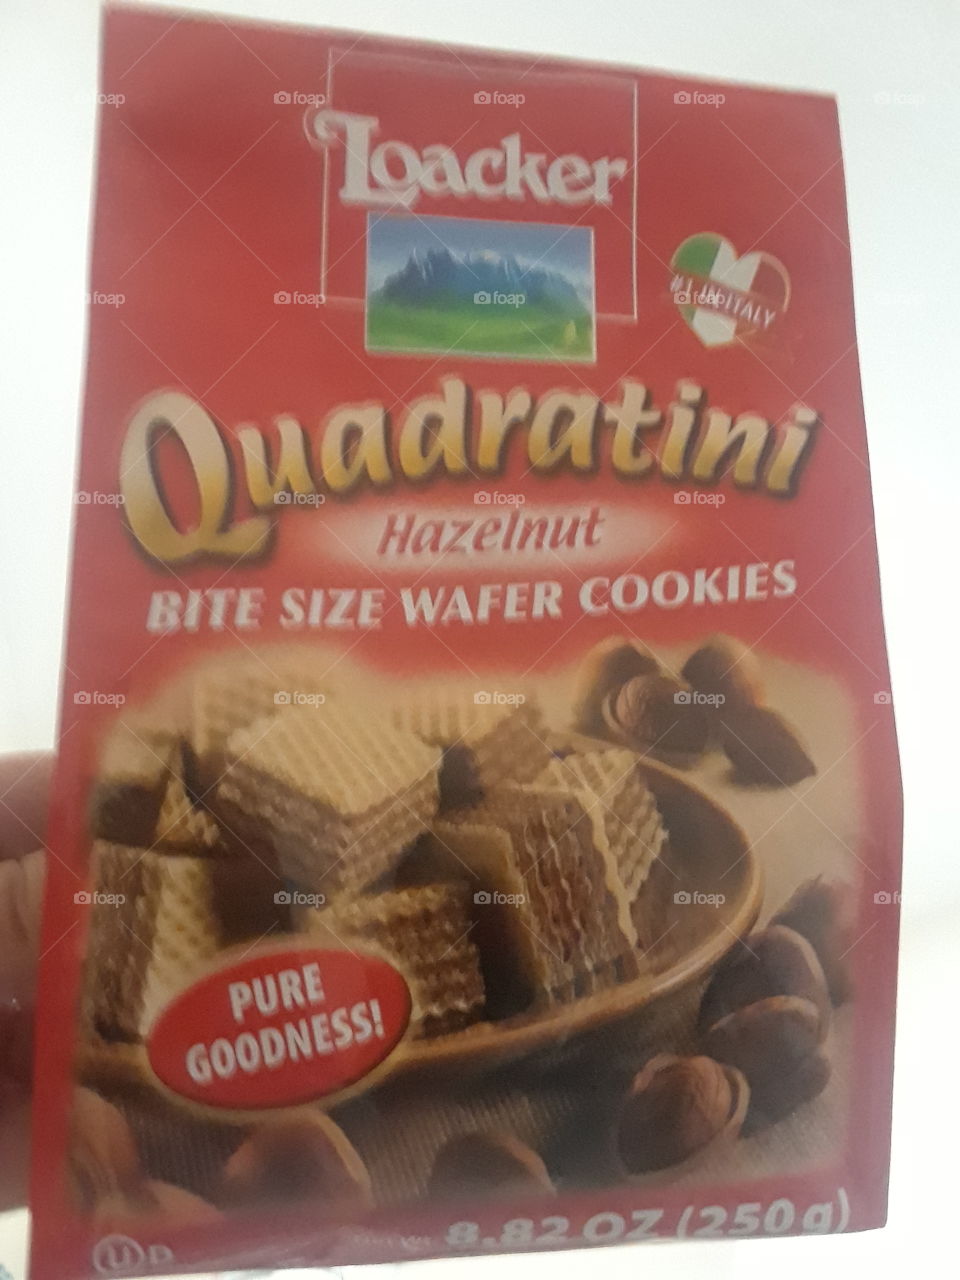 Delicious hazelnut cookies for dessert.#1 in italy.Pure goodness.no preservatives.no artificial flavors.LOACKER.Late night snack time.Milk and cookies.